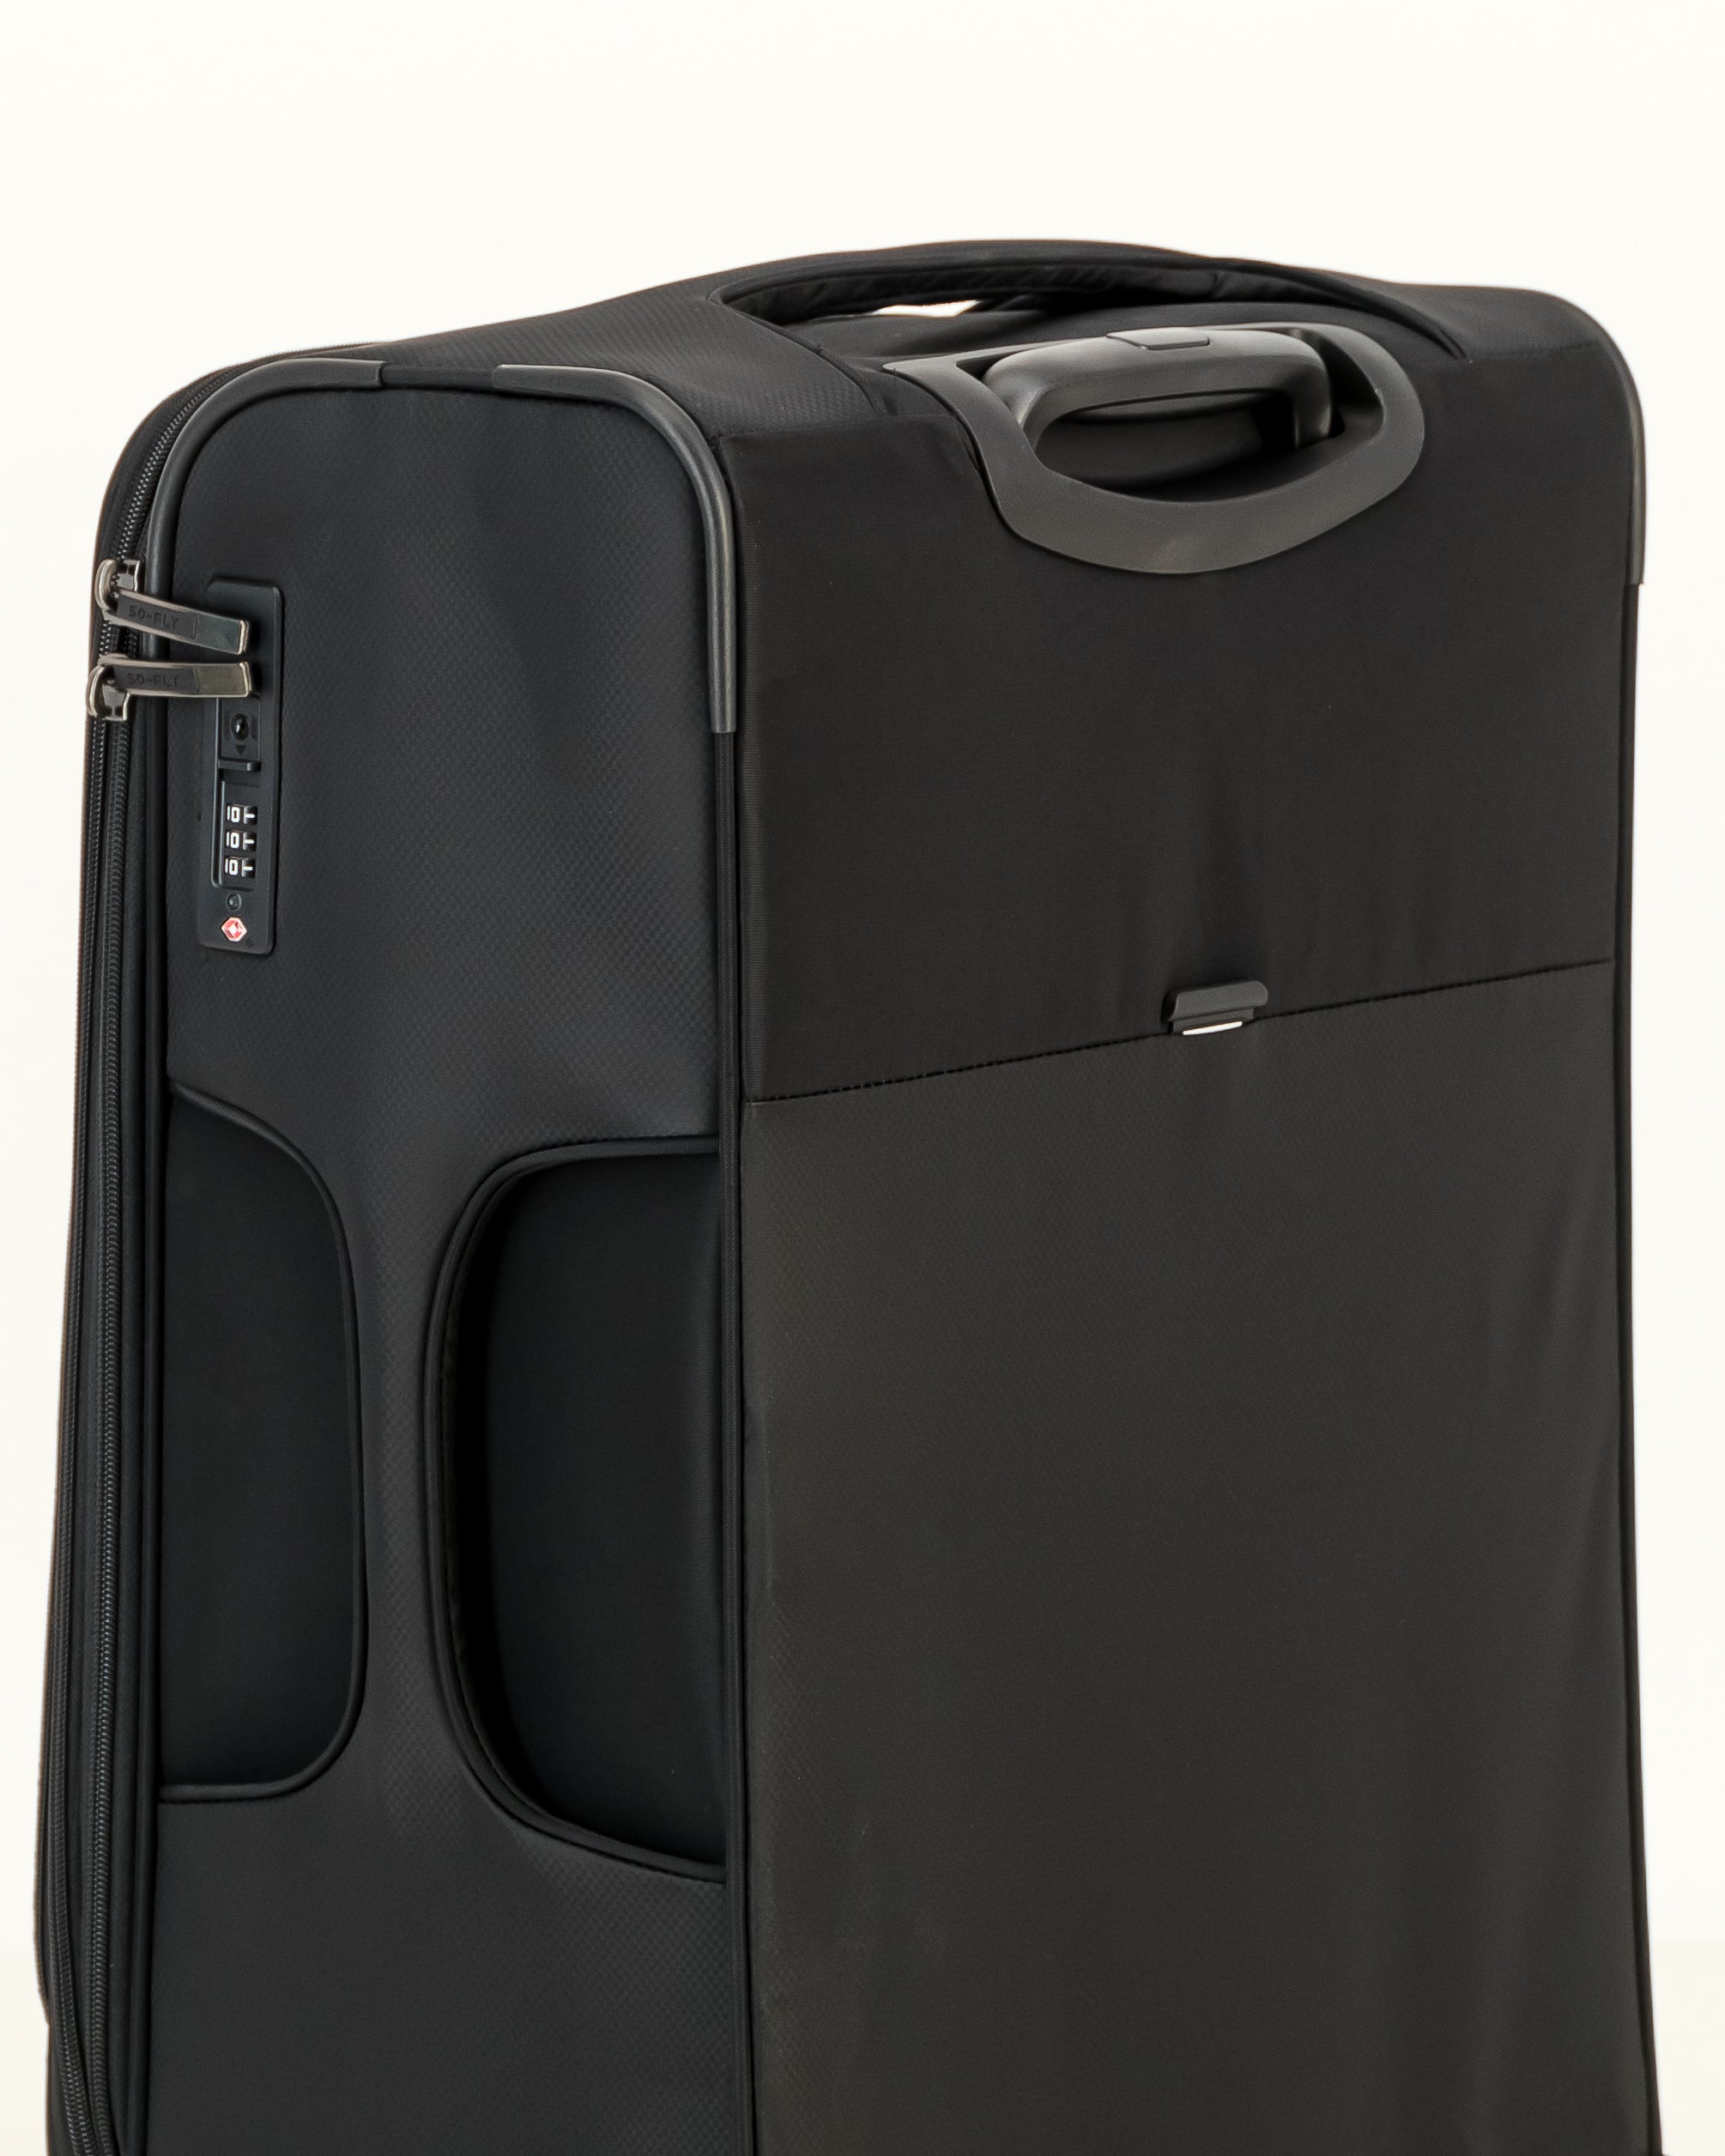 So-Fly X-Lite Large 4 Wheel Spinner Suitcase